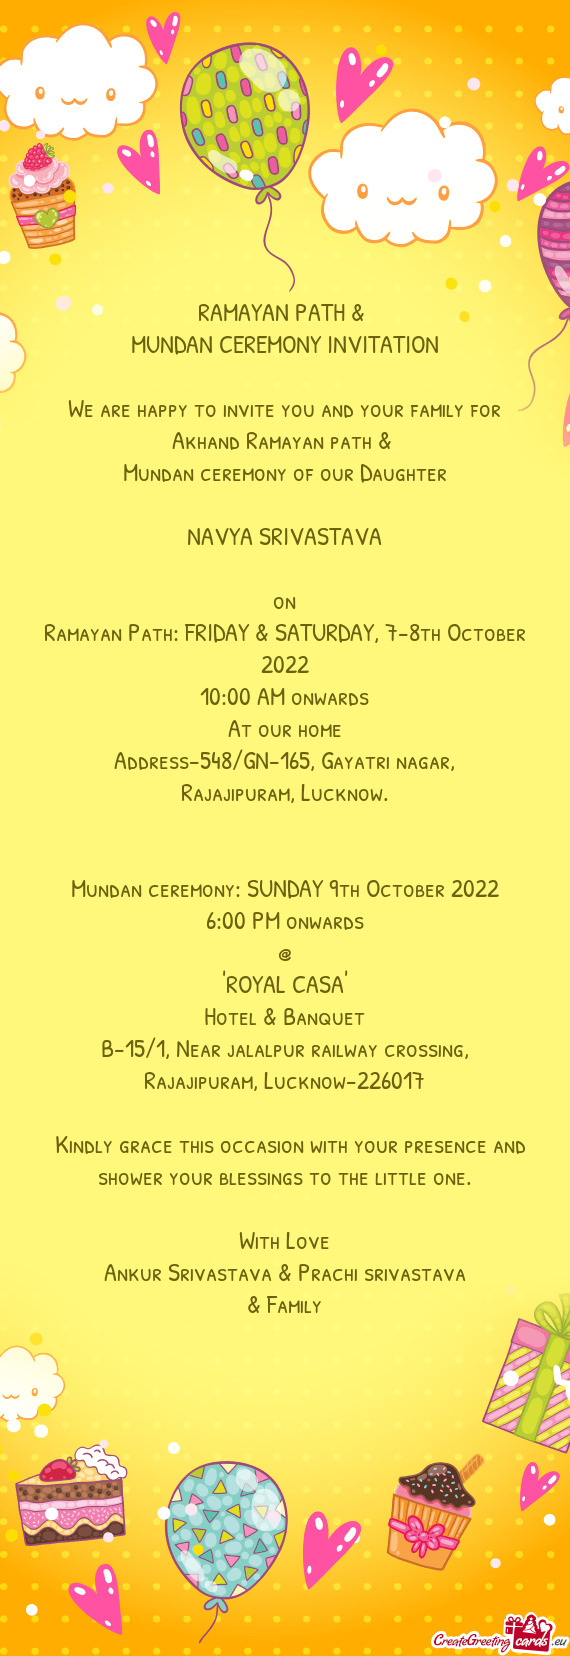 We are happy to invite you and your family for Akhand Ramayan path &